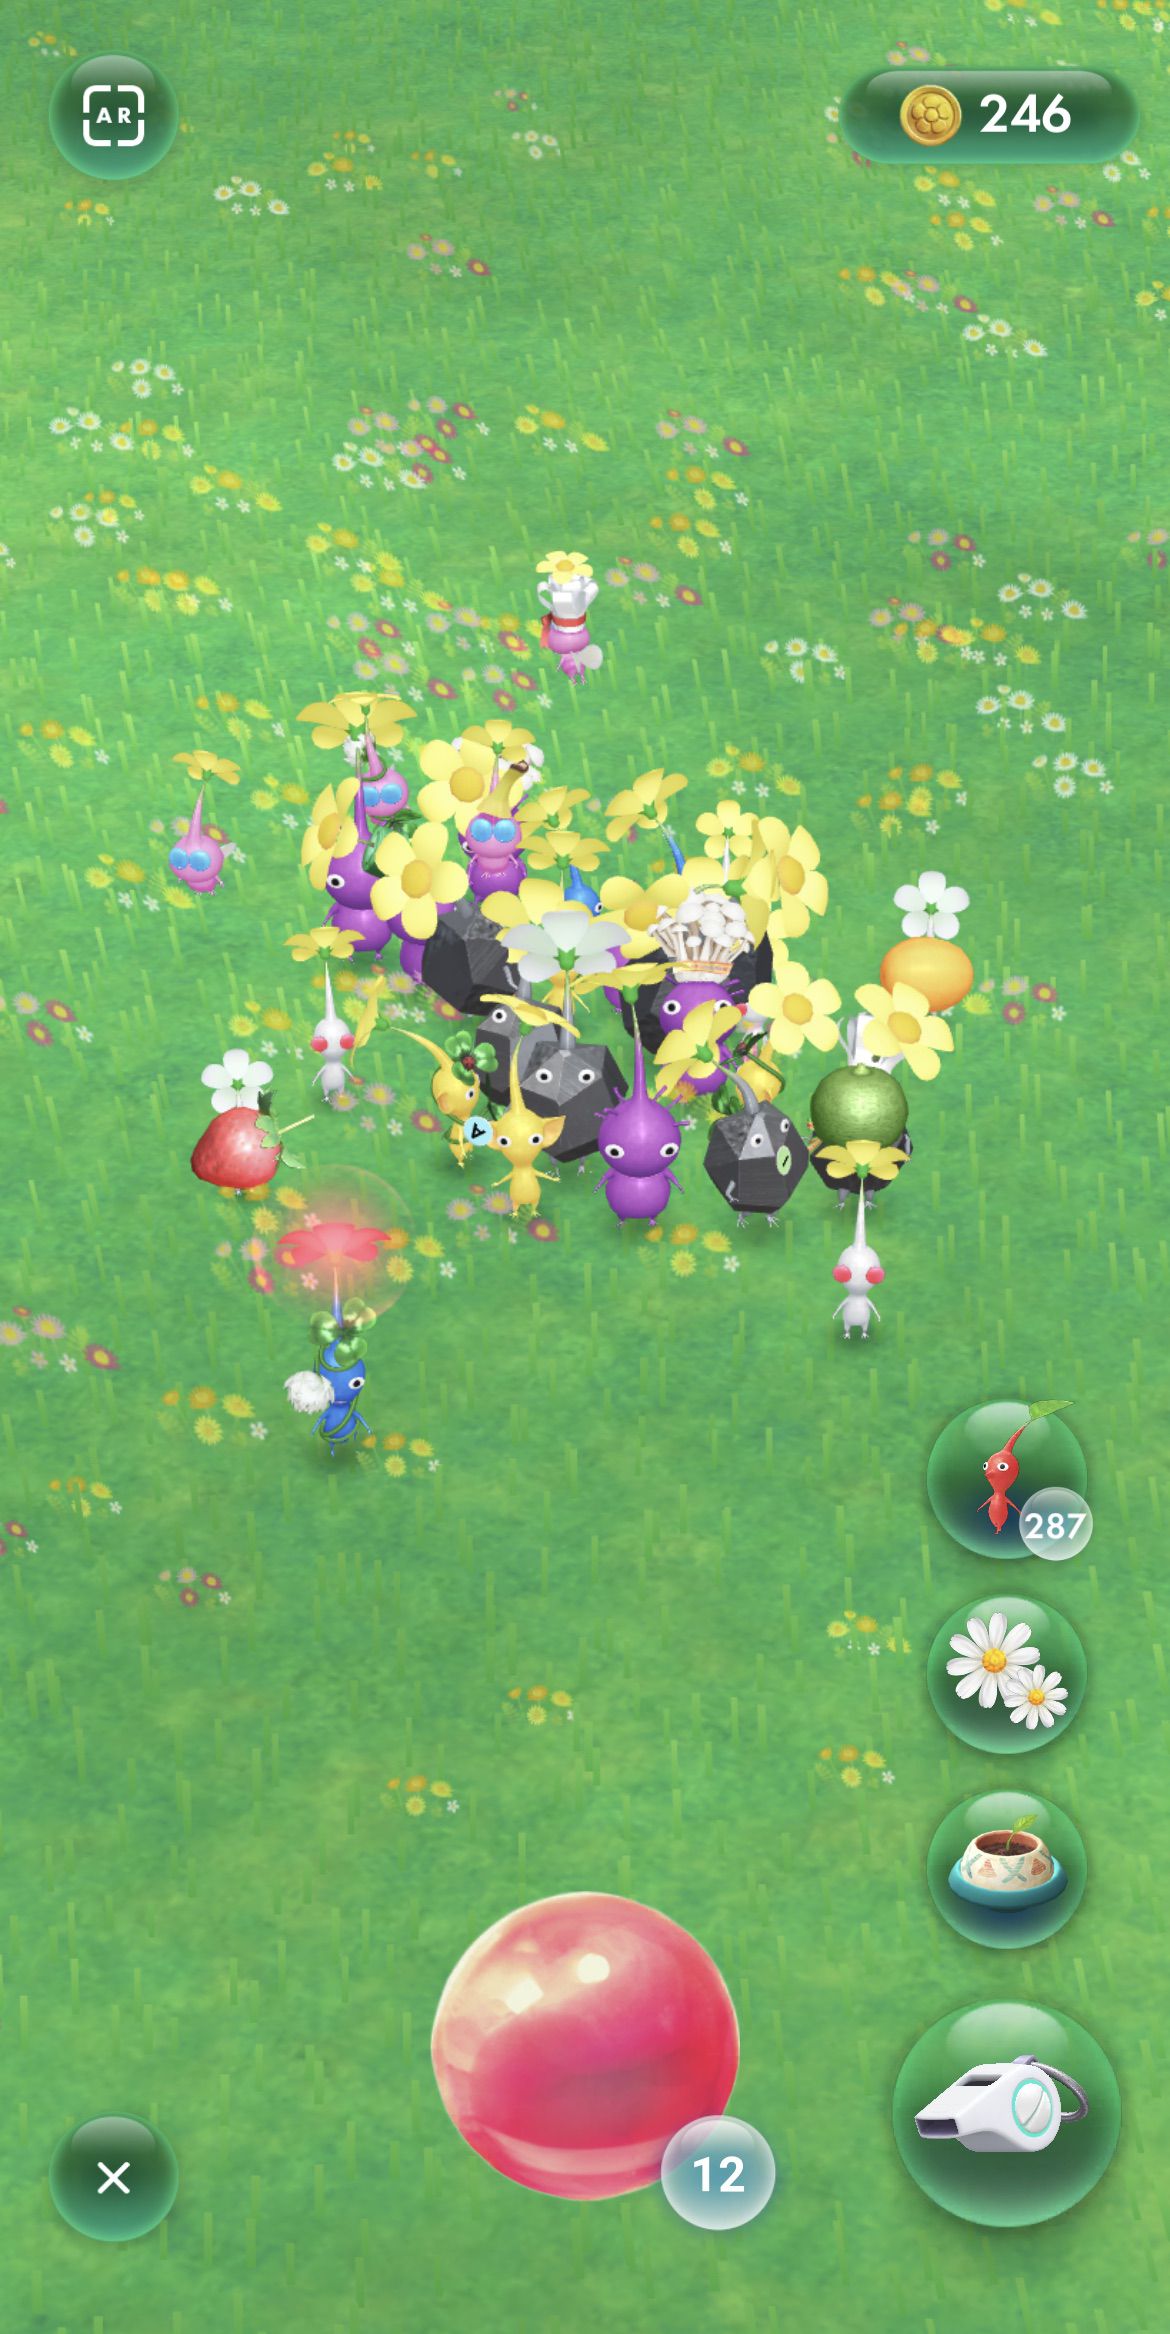 The Pikmin Bloom interface shows a player waiting to eat their Pikmin fruit